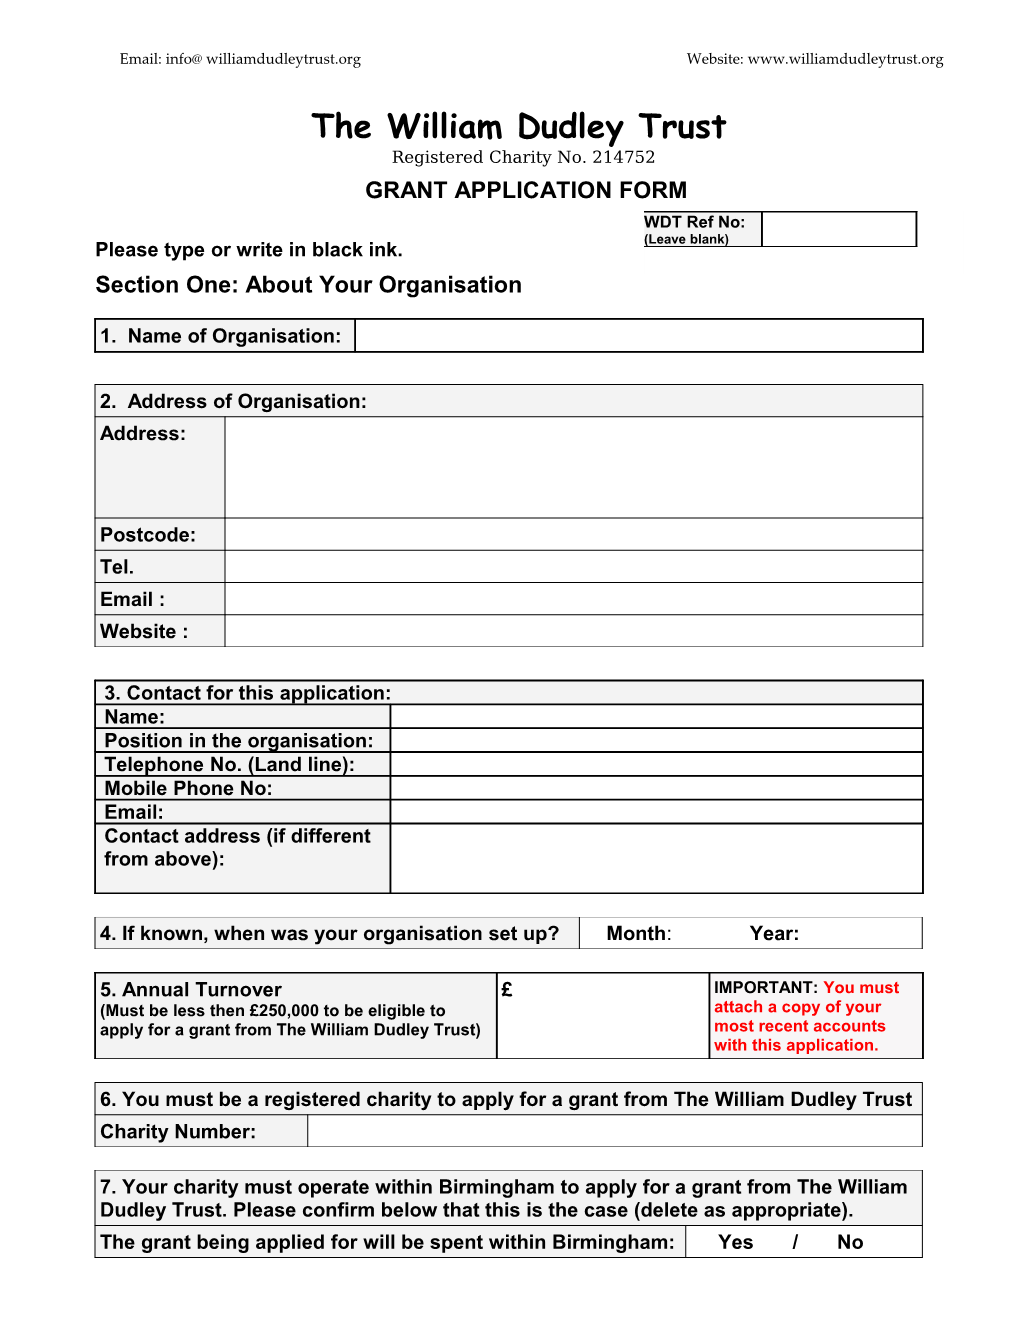 Healthy Lifestyles Grant 2006-07 - Application Form